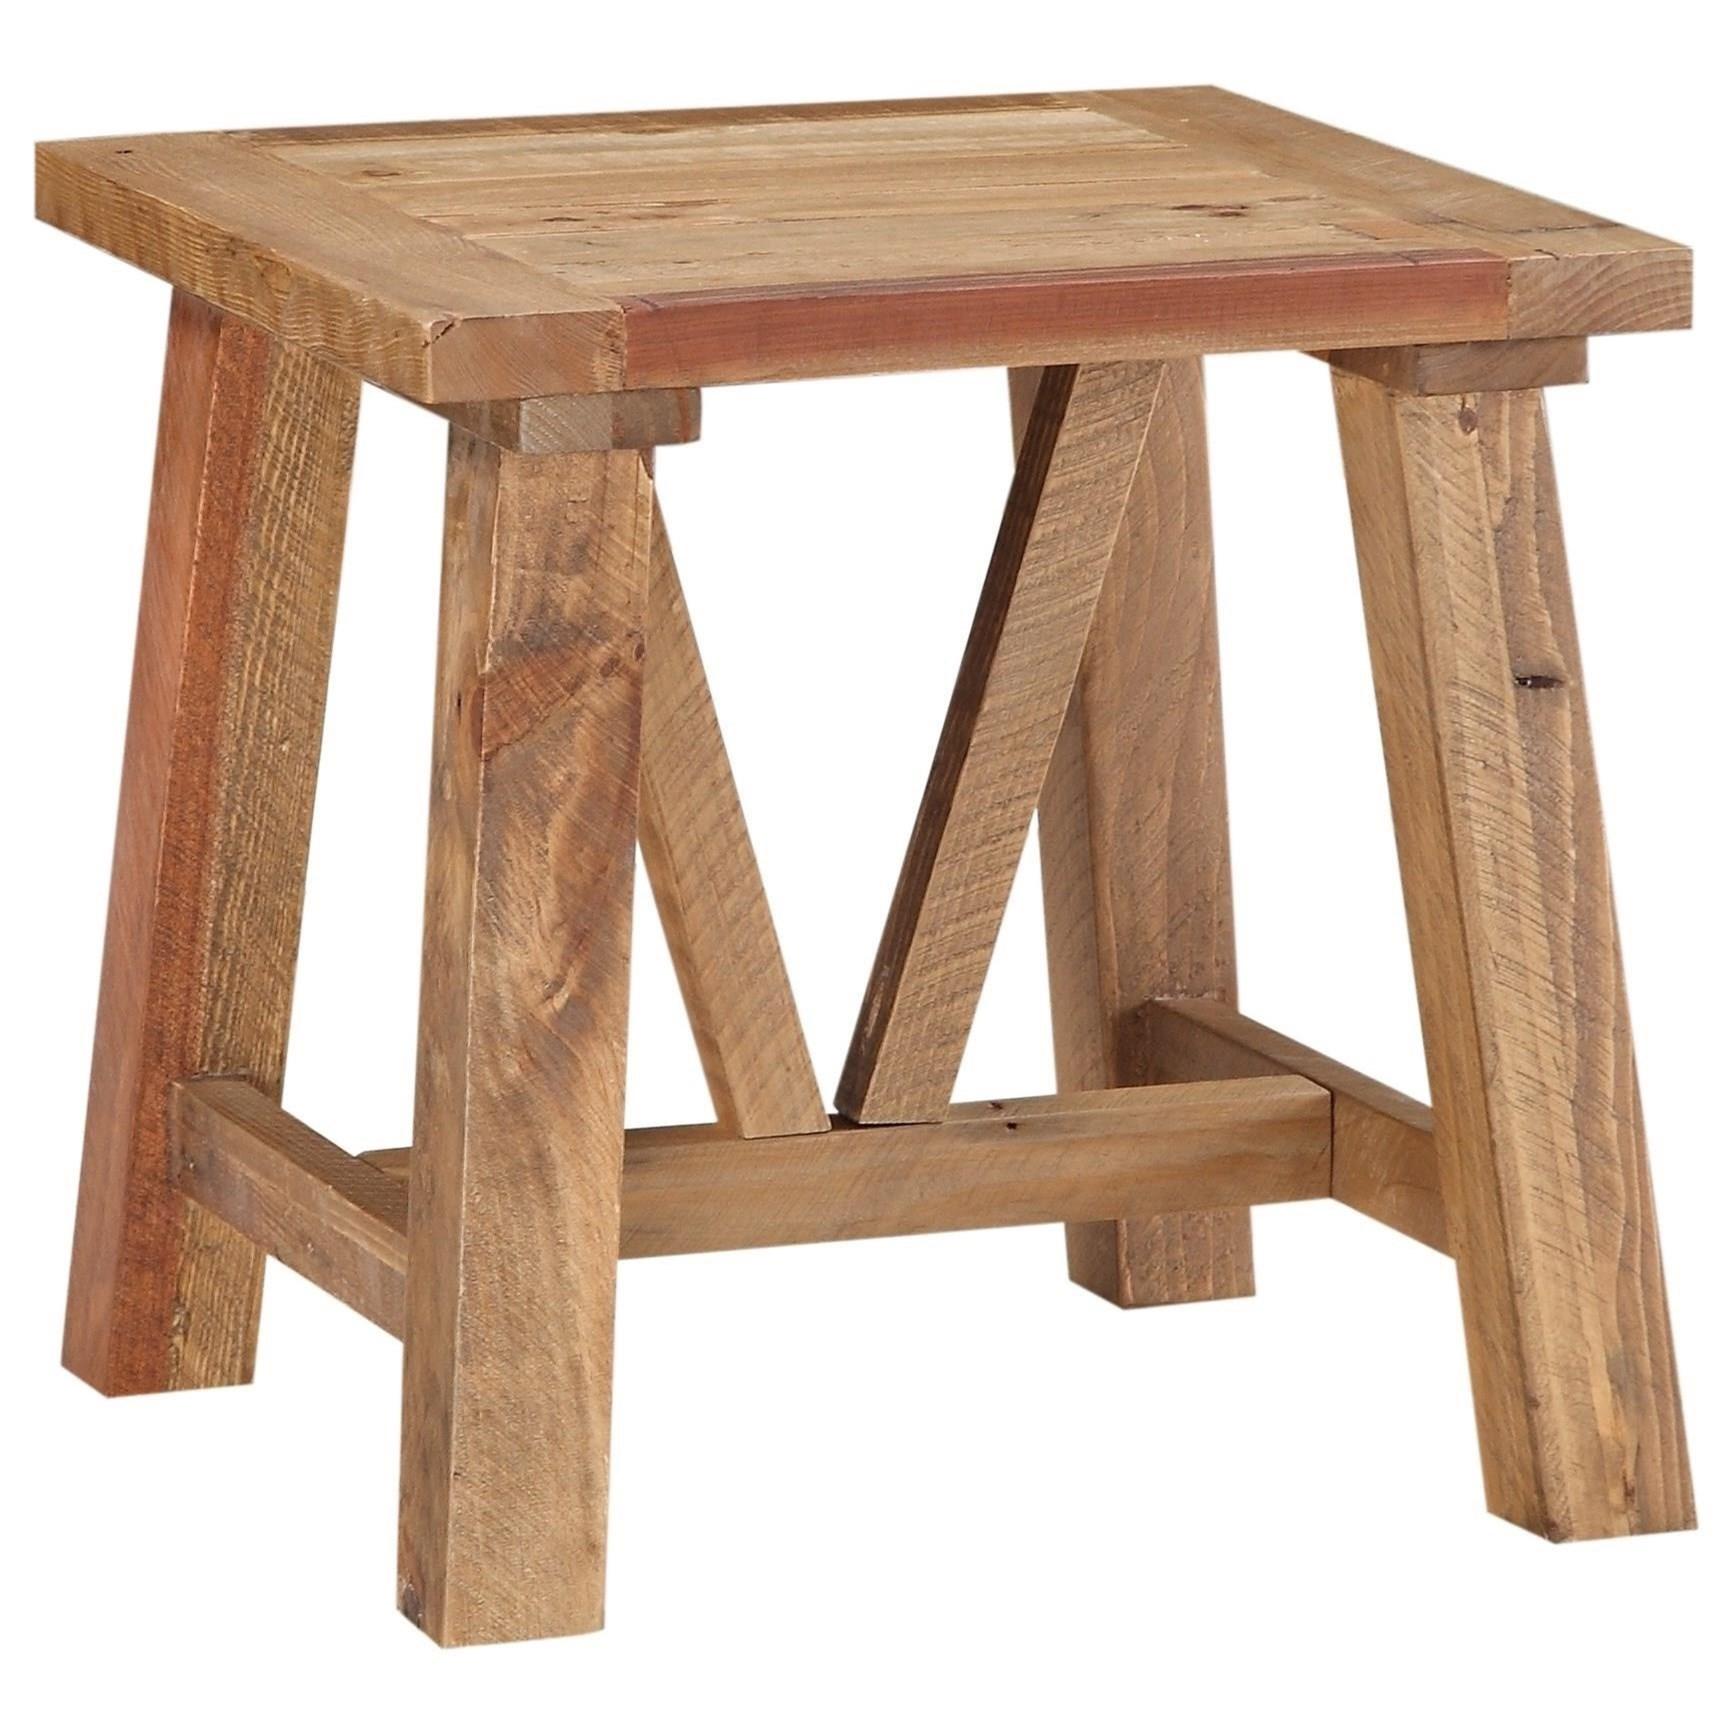 

    
Reclaimed Wood Rectangular End Table in Rustic Tawny HARBY by Modus Furniture
